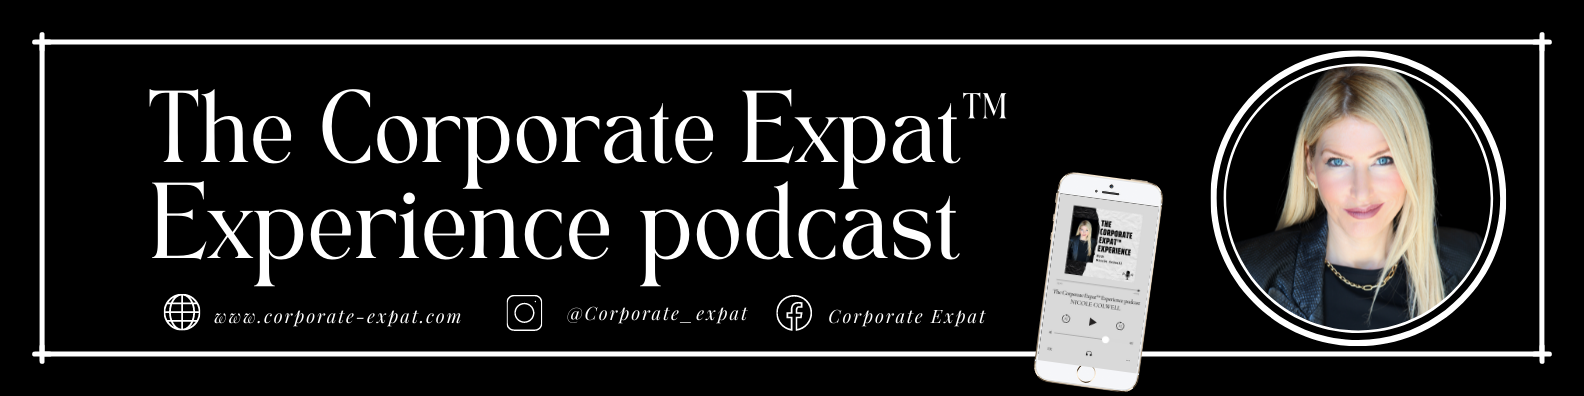 The Corporate Expat™ Experience with Nicole Colwell